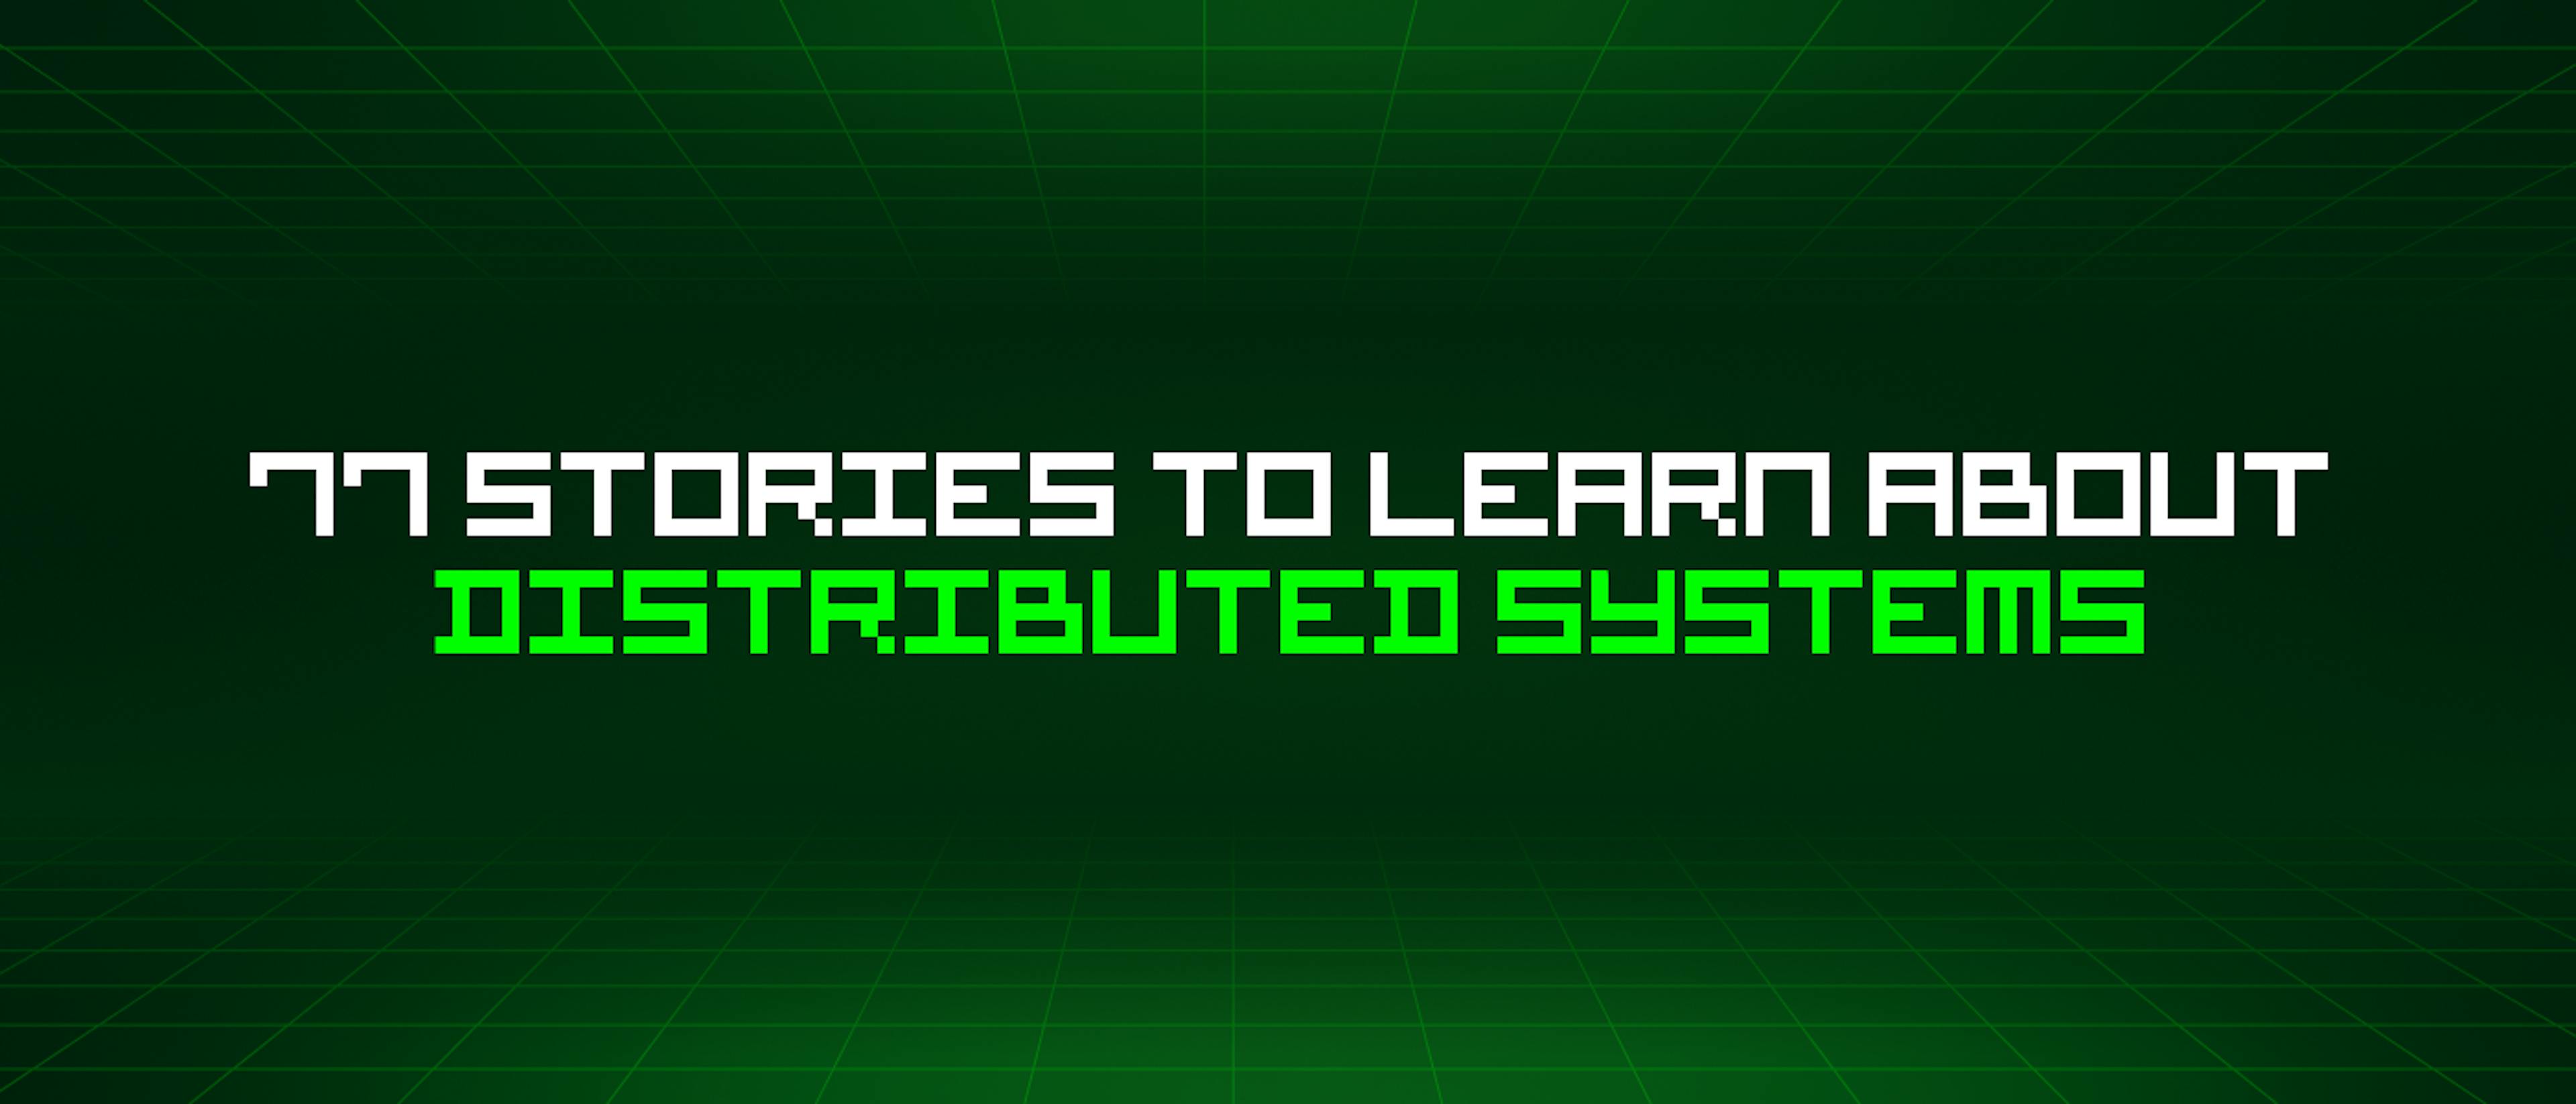 featured image - 77 Stories To Learn About Distributed Systems